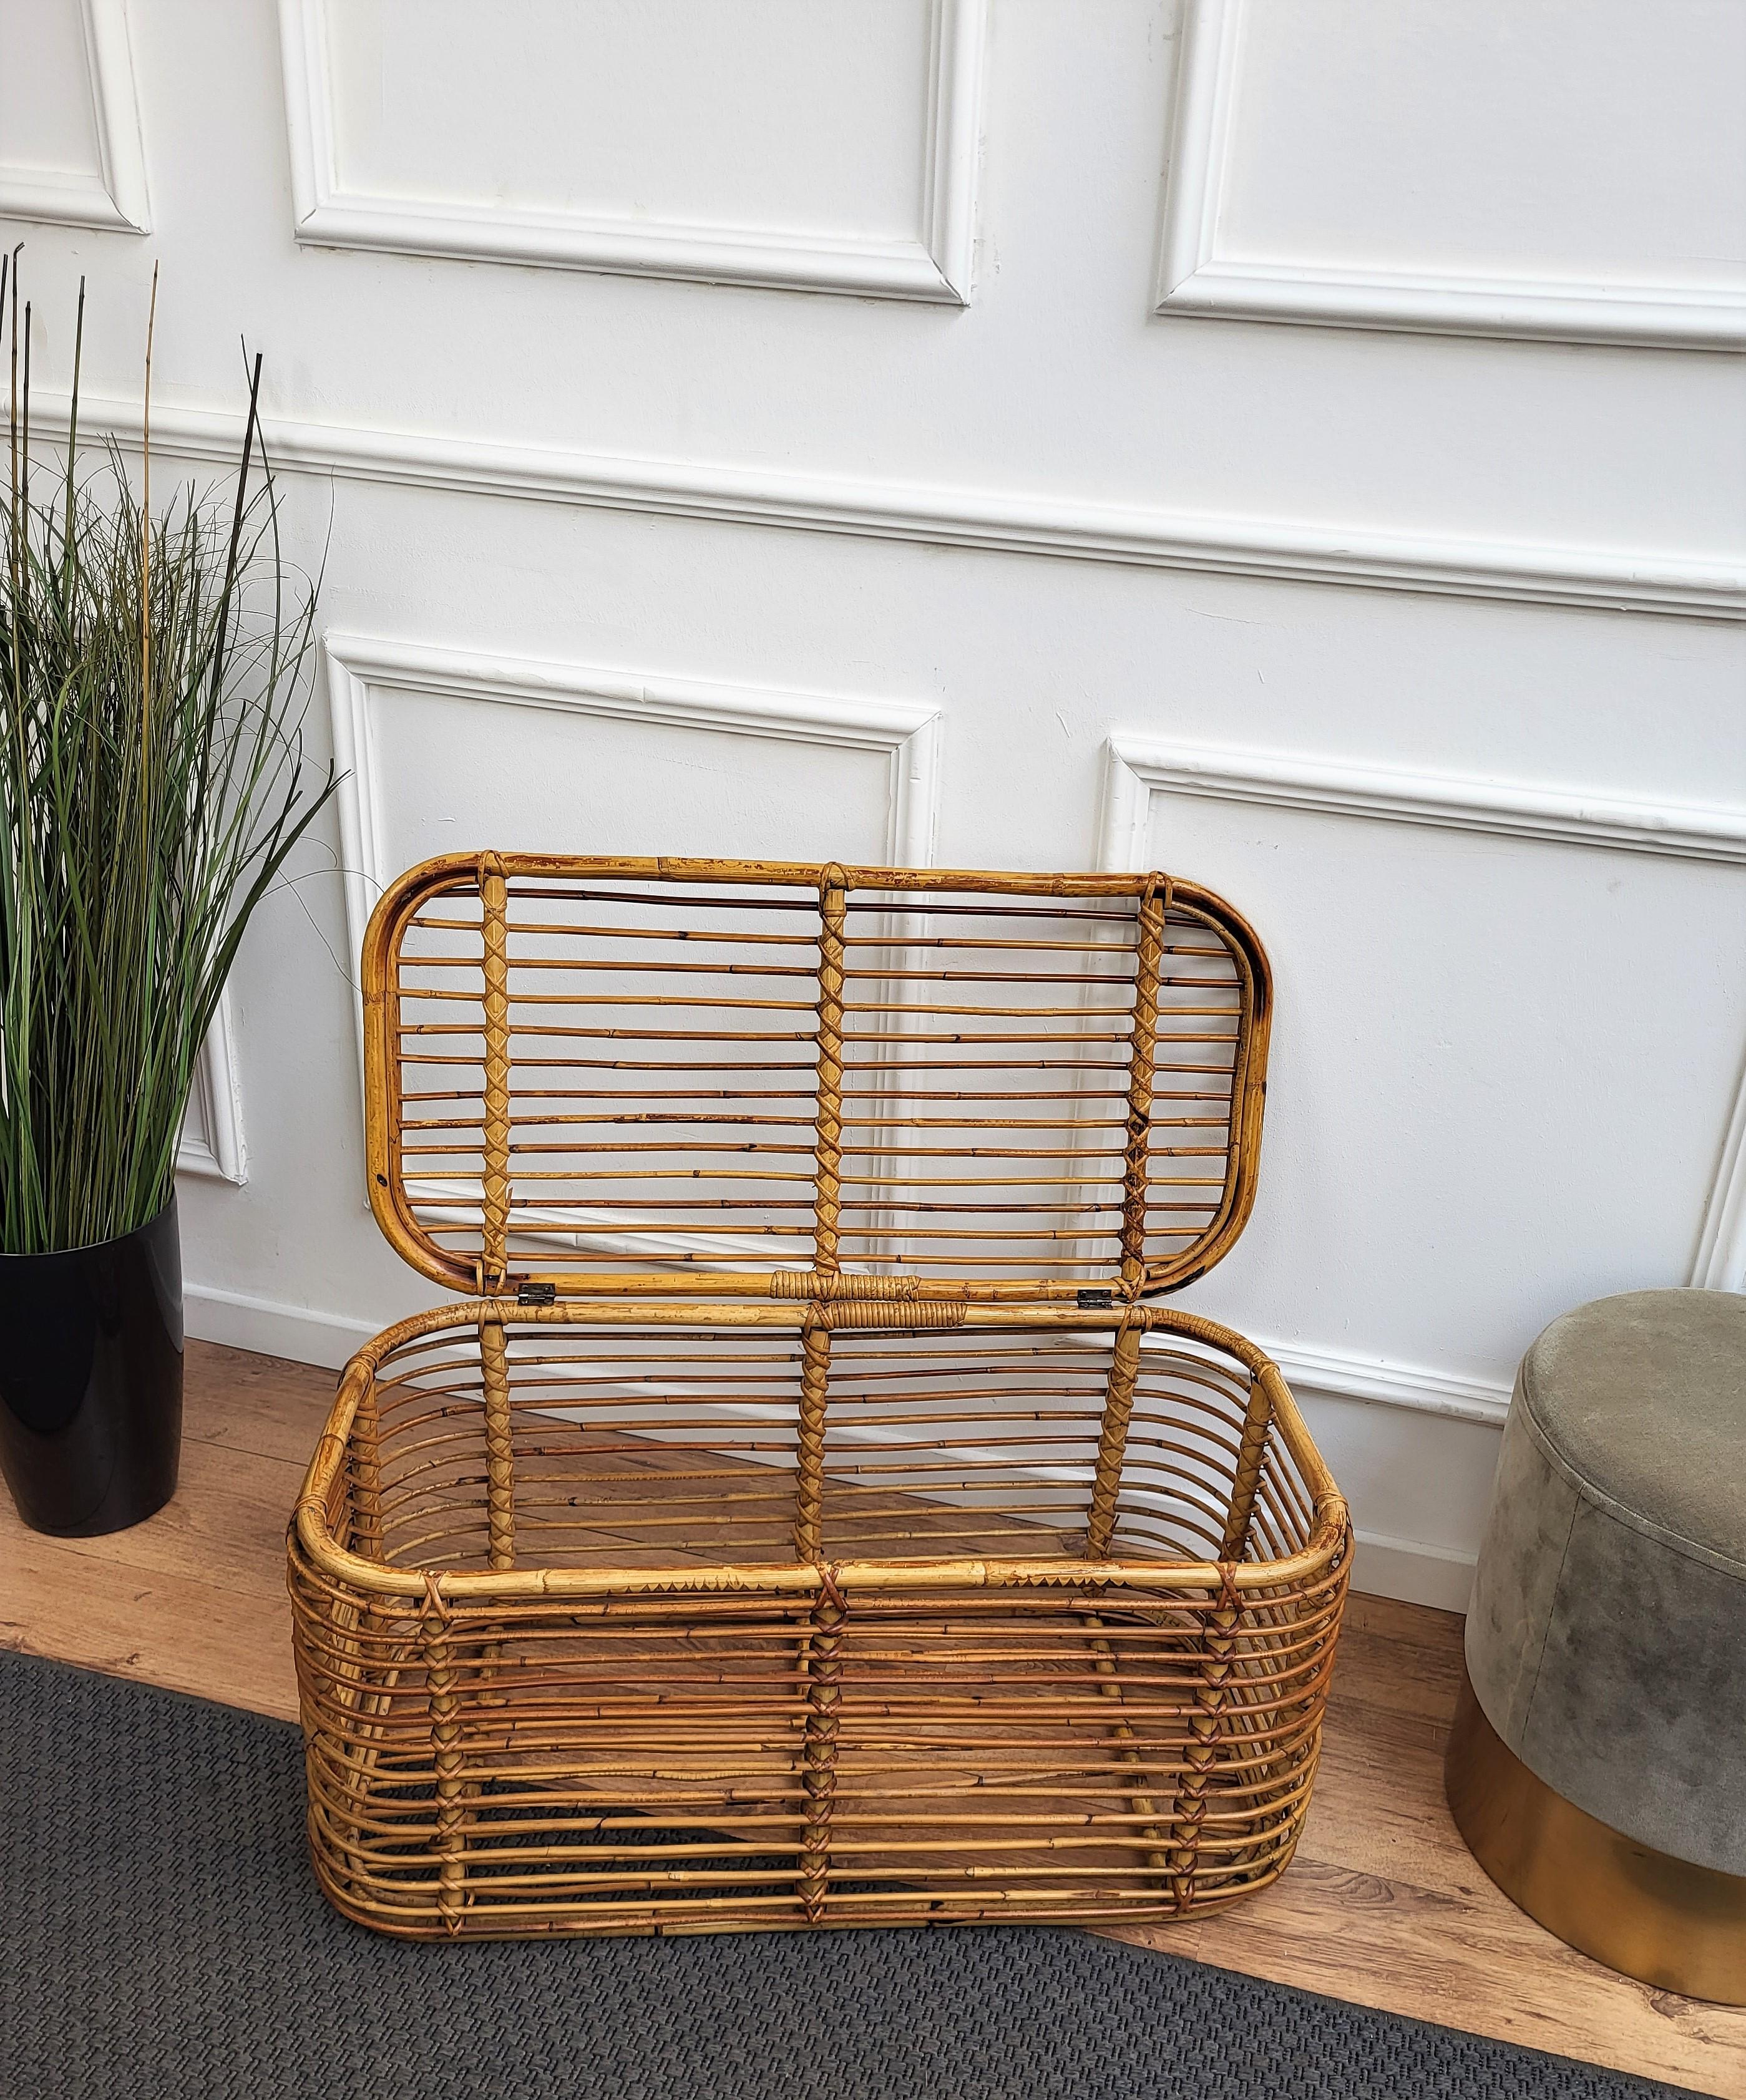 French Provincial 1960s Italian Designer Bamboo Rattan Bohemian French Riviera Basket Container For Sale